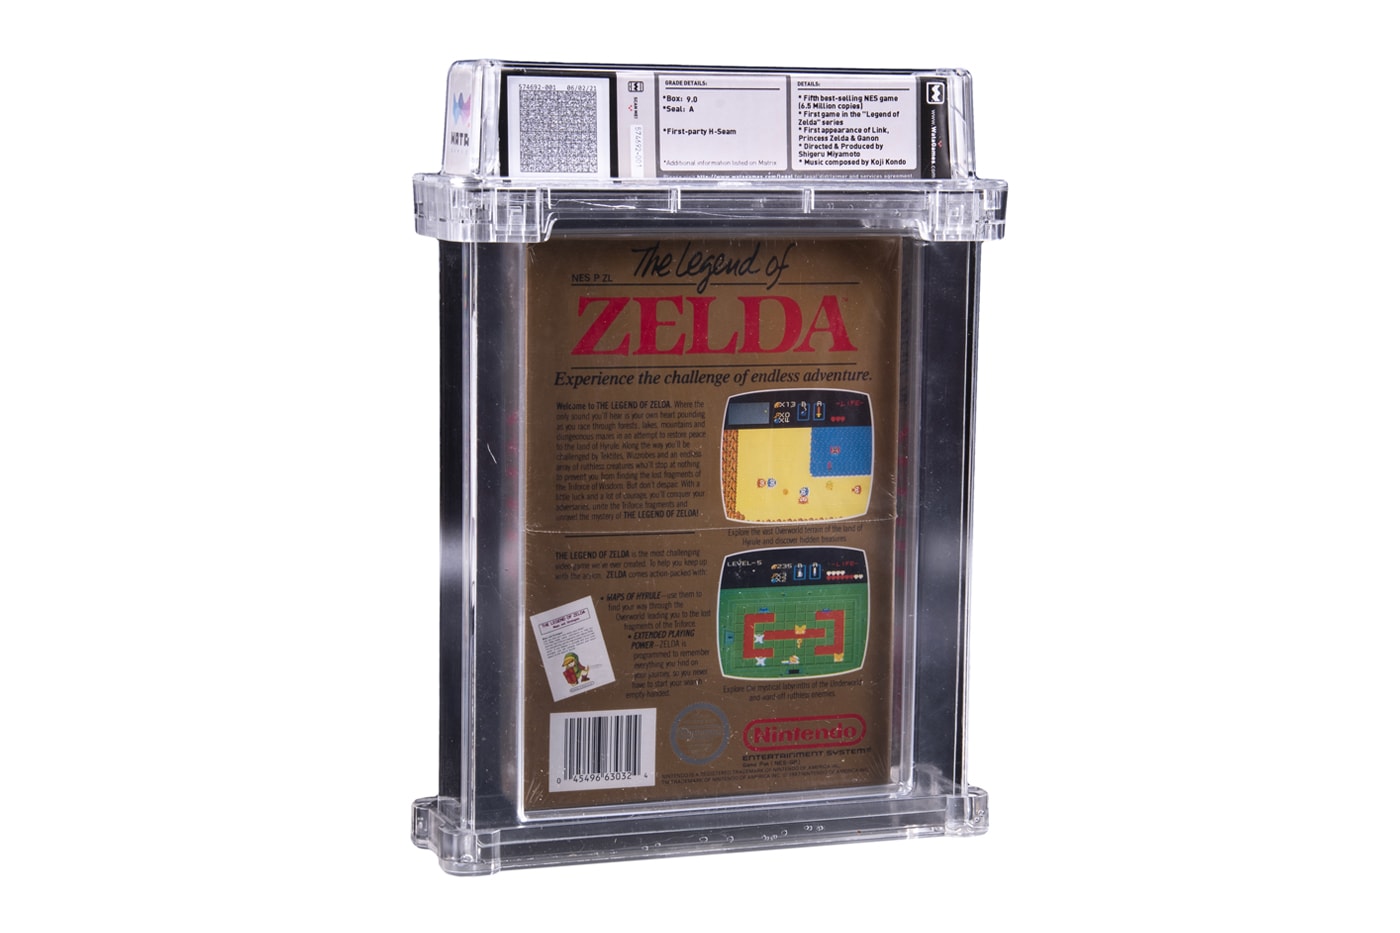 Goldin Auctions 1986 1985 the legend of zelda super mario bros WATA video game auction sealed auction retro gaming 